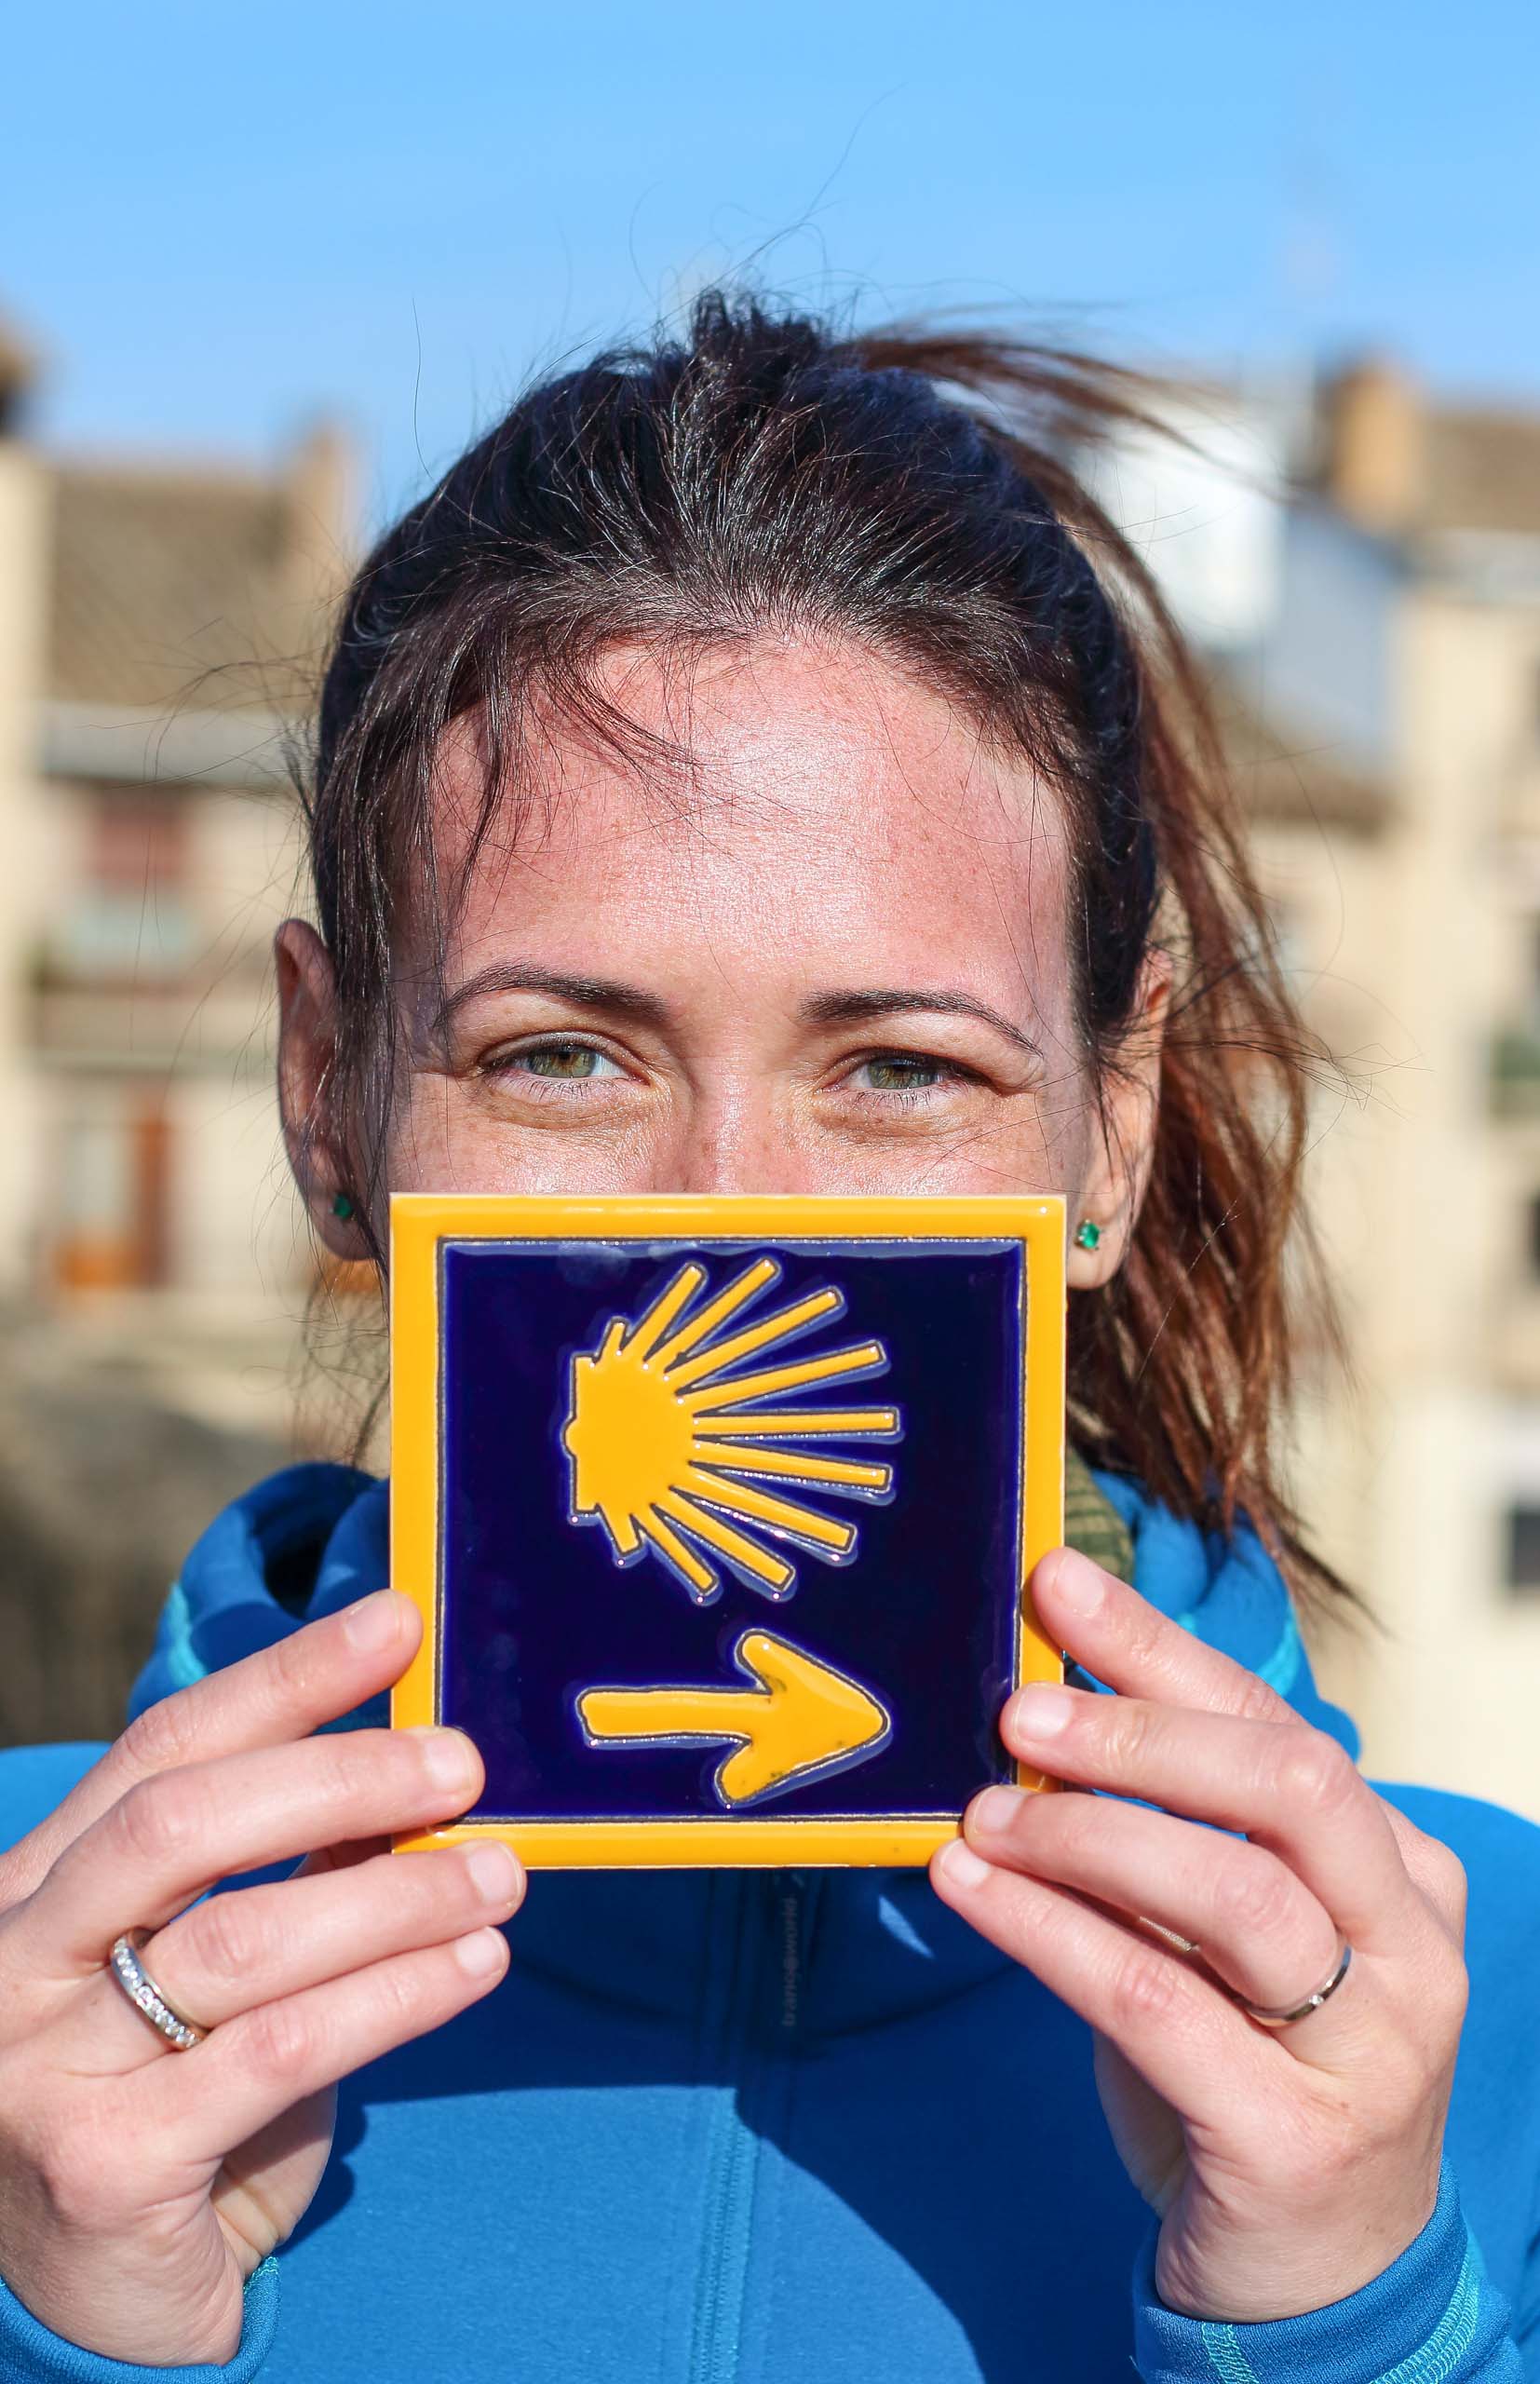 A woman holding a "Camino de Santiago" blue tile painted with a yellow shell and arrow.